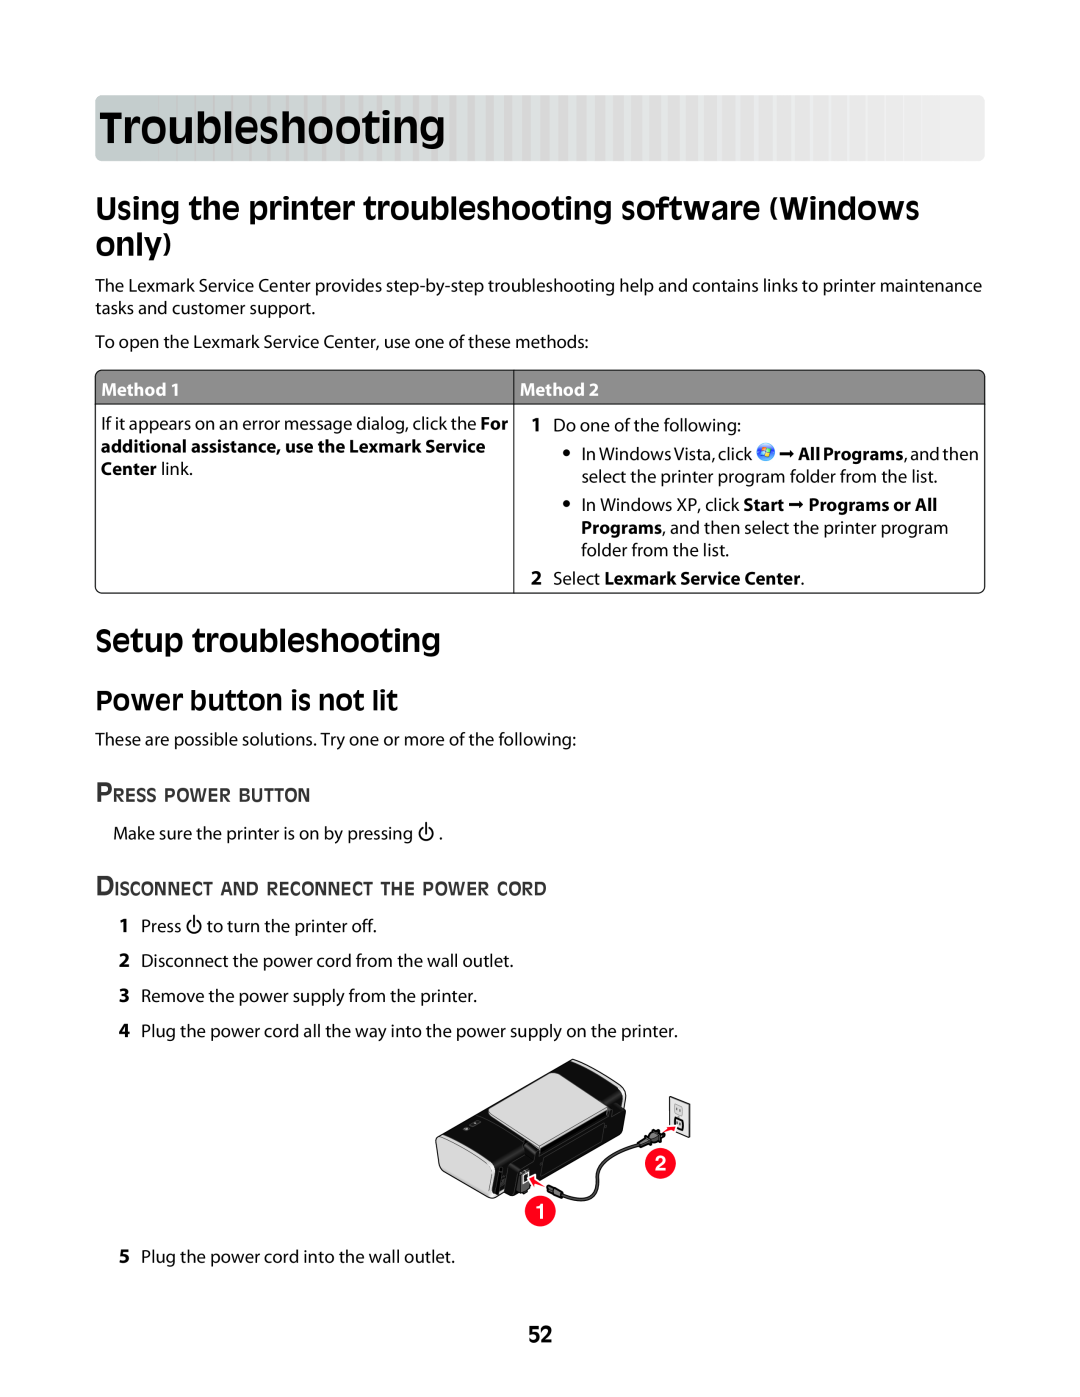 Lexmark Z2400 Series manual Troubleshooting, Using the printer troubleshooting software Windows only, Setup troubleshooting 